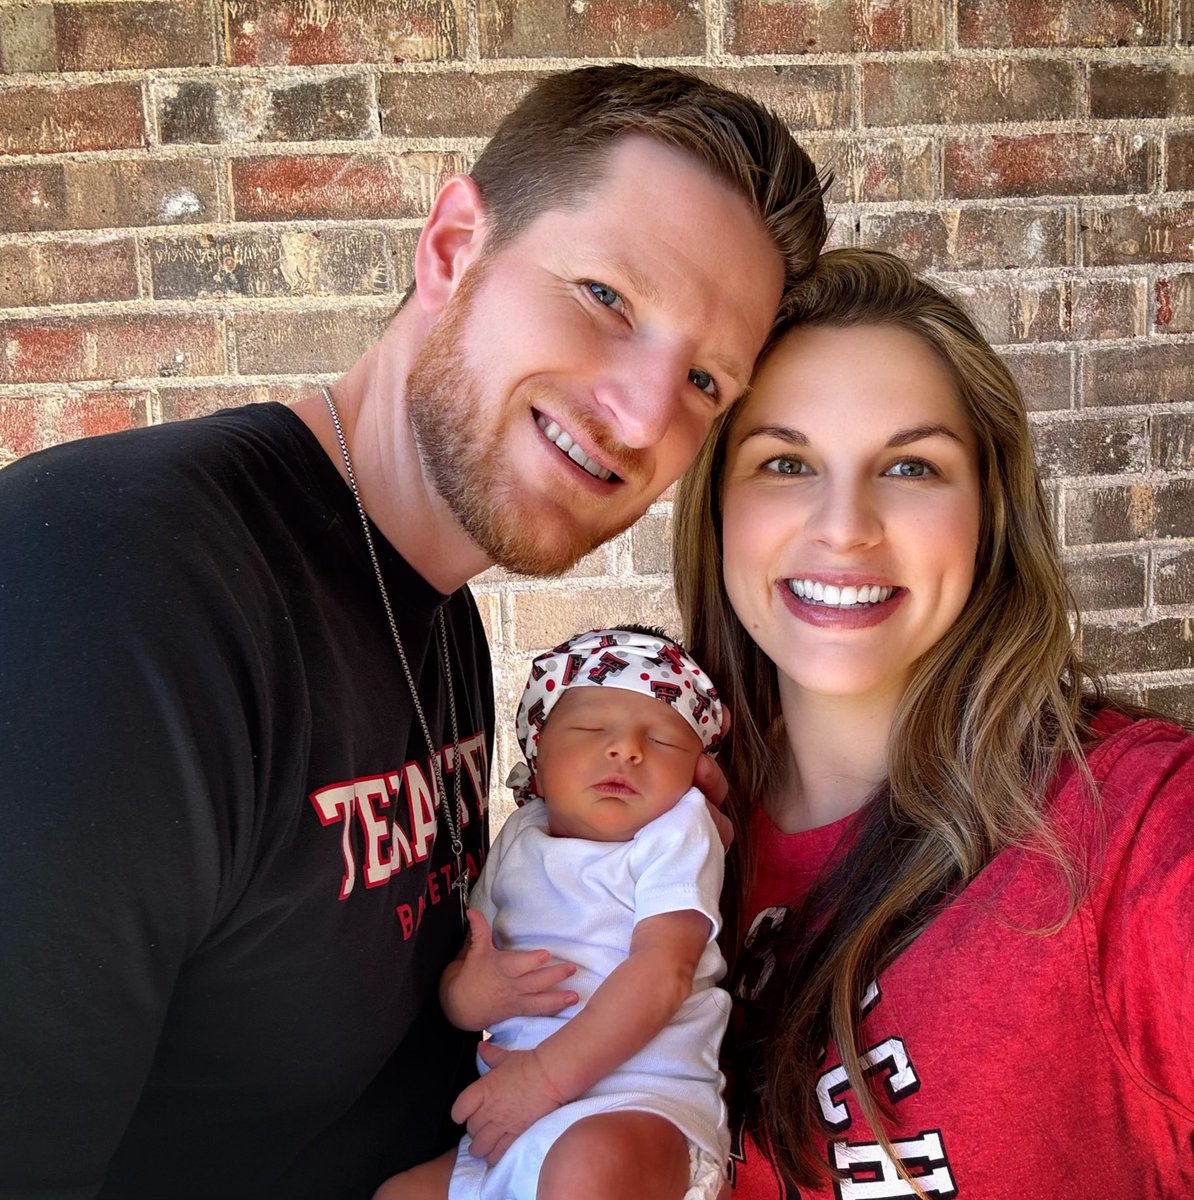 Help us welcome Keylynn Barnwell to the Red Raider family and congratulate Emily and @CoachLuke137! #TTW | #WreckEm